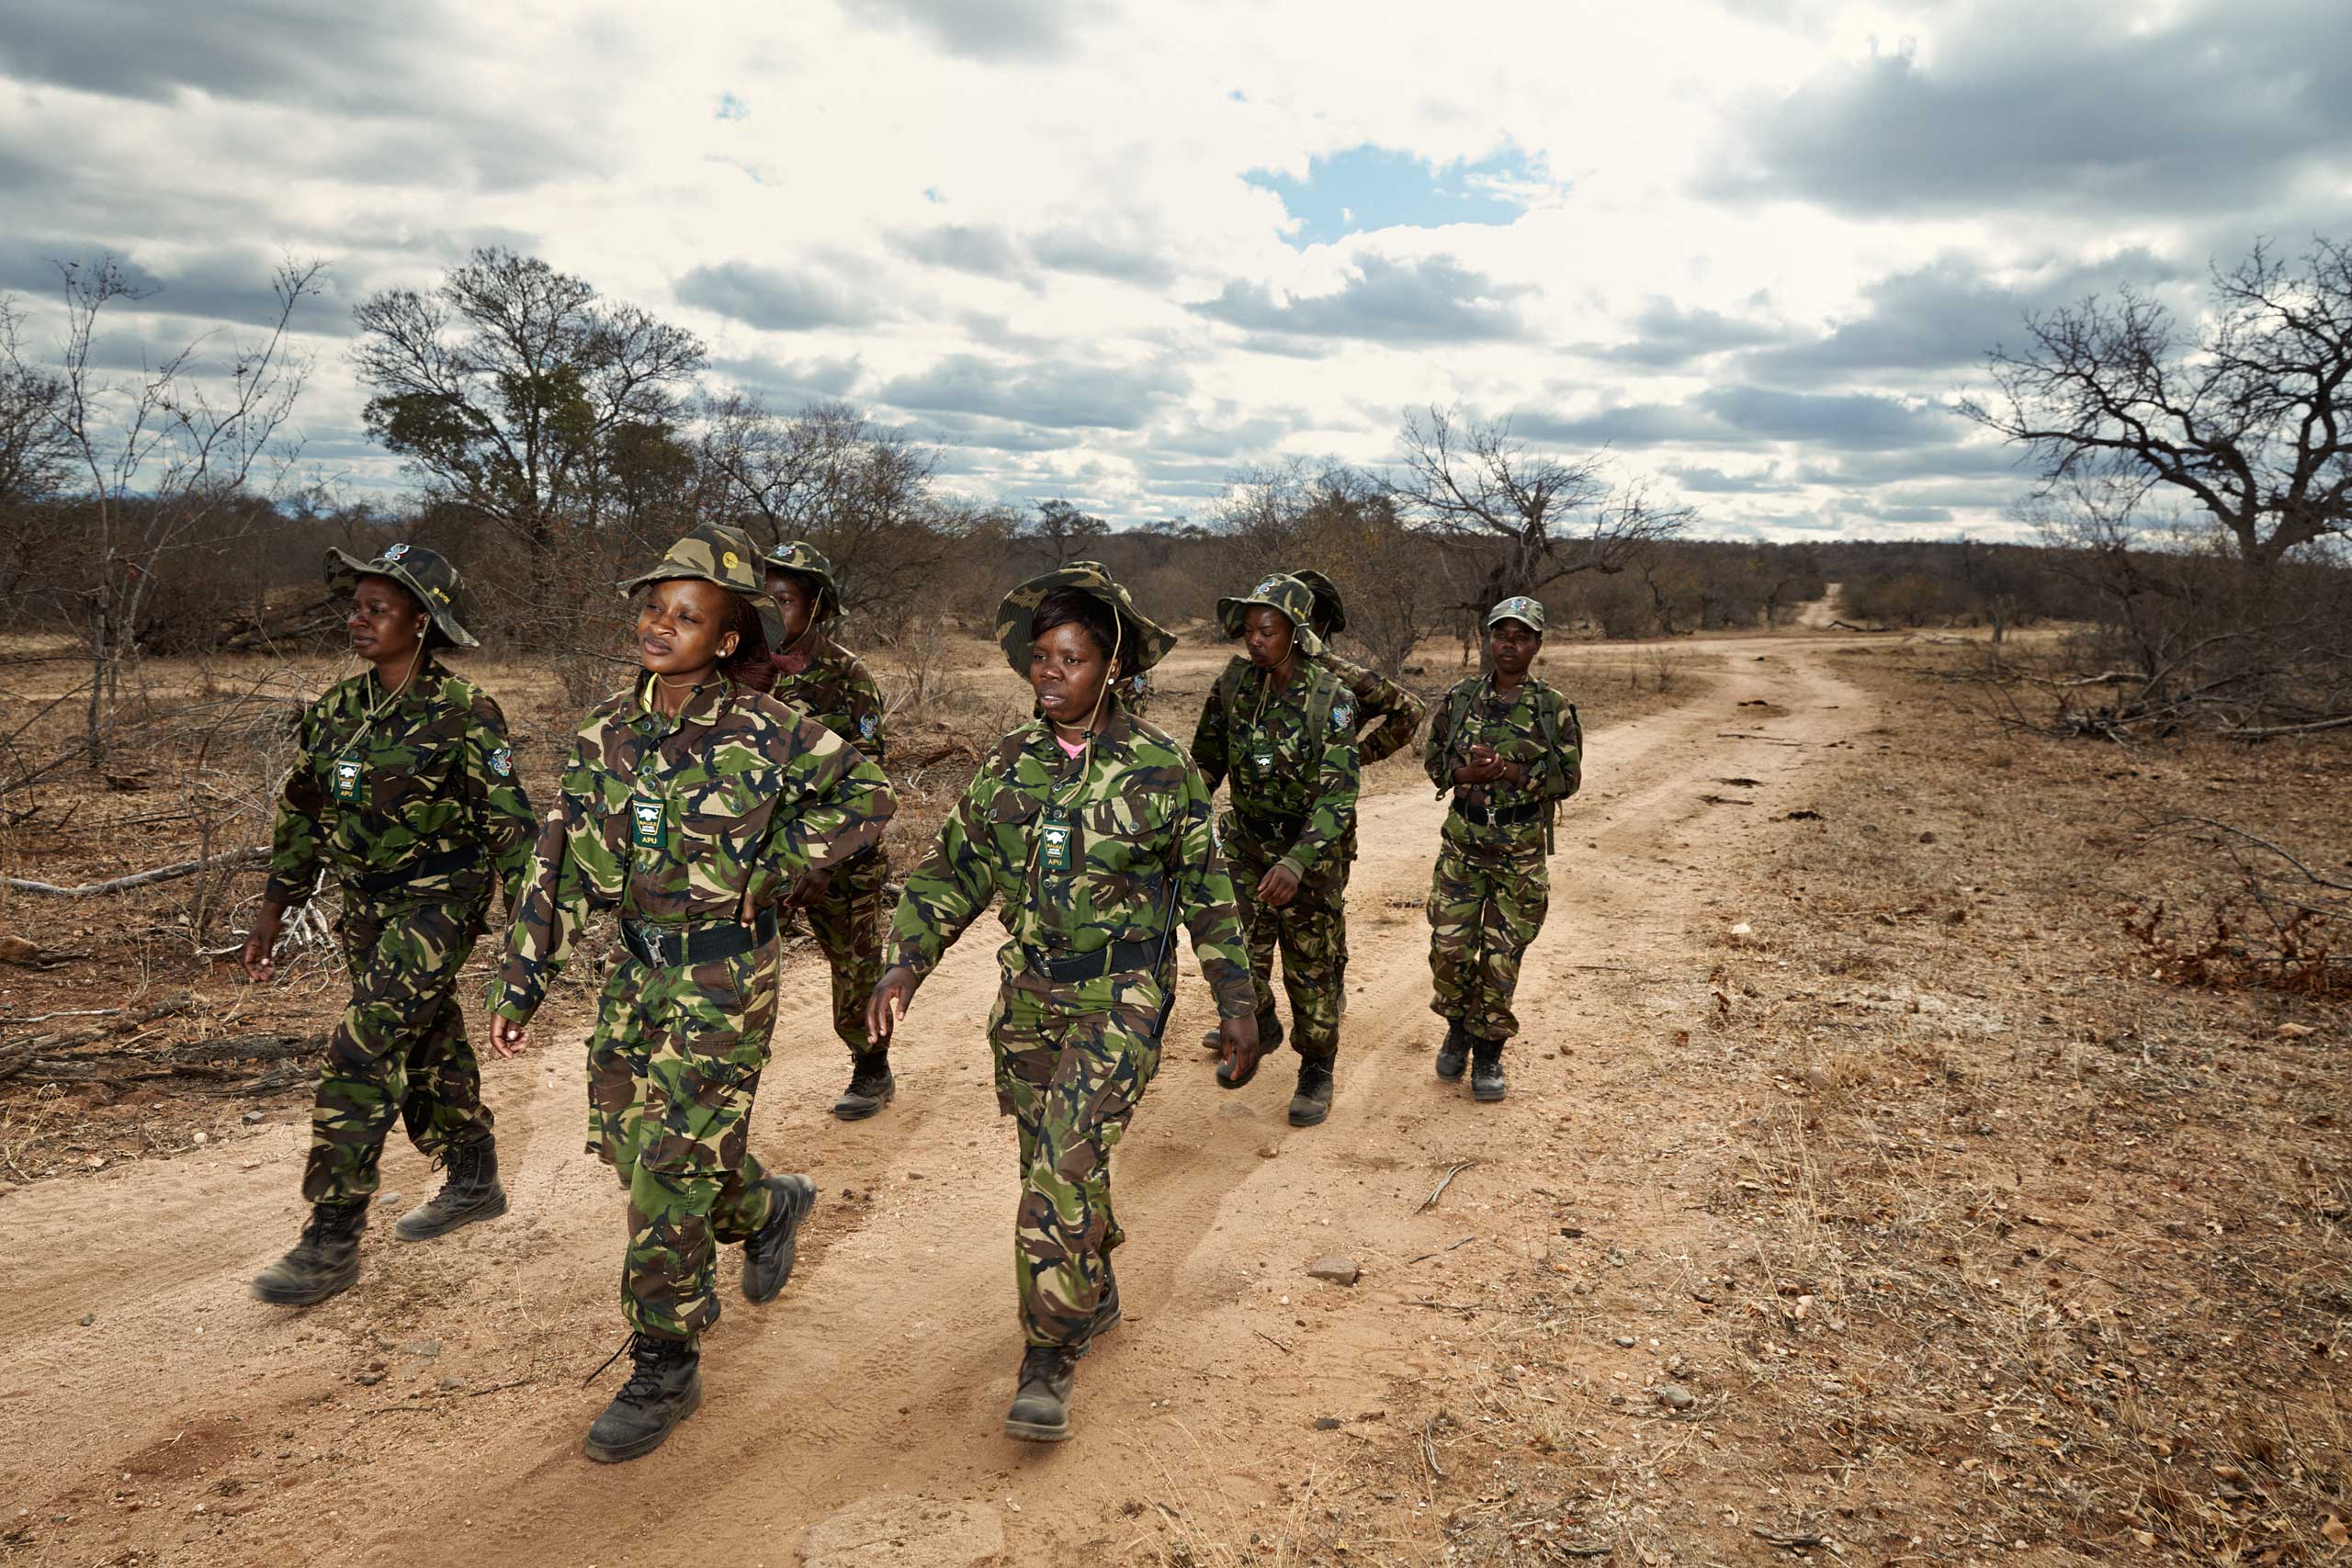 Black Mambas on patrol in Balule Nature Reserve, in northern South Africa. (Julia Gunther)